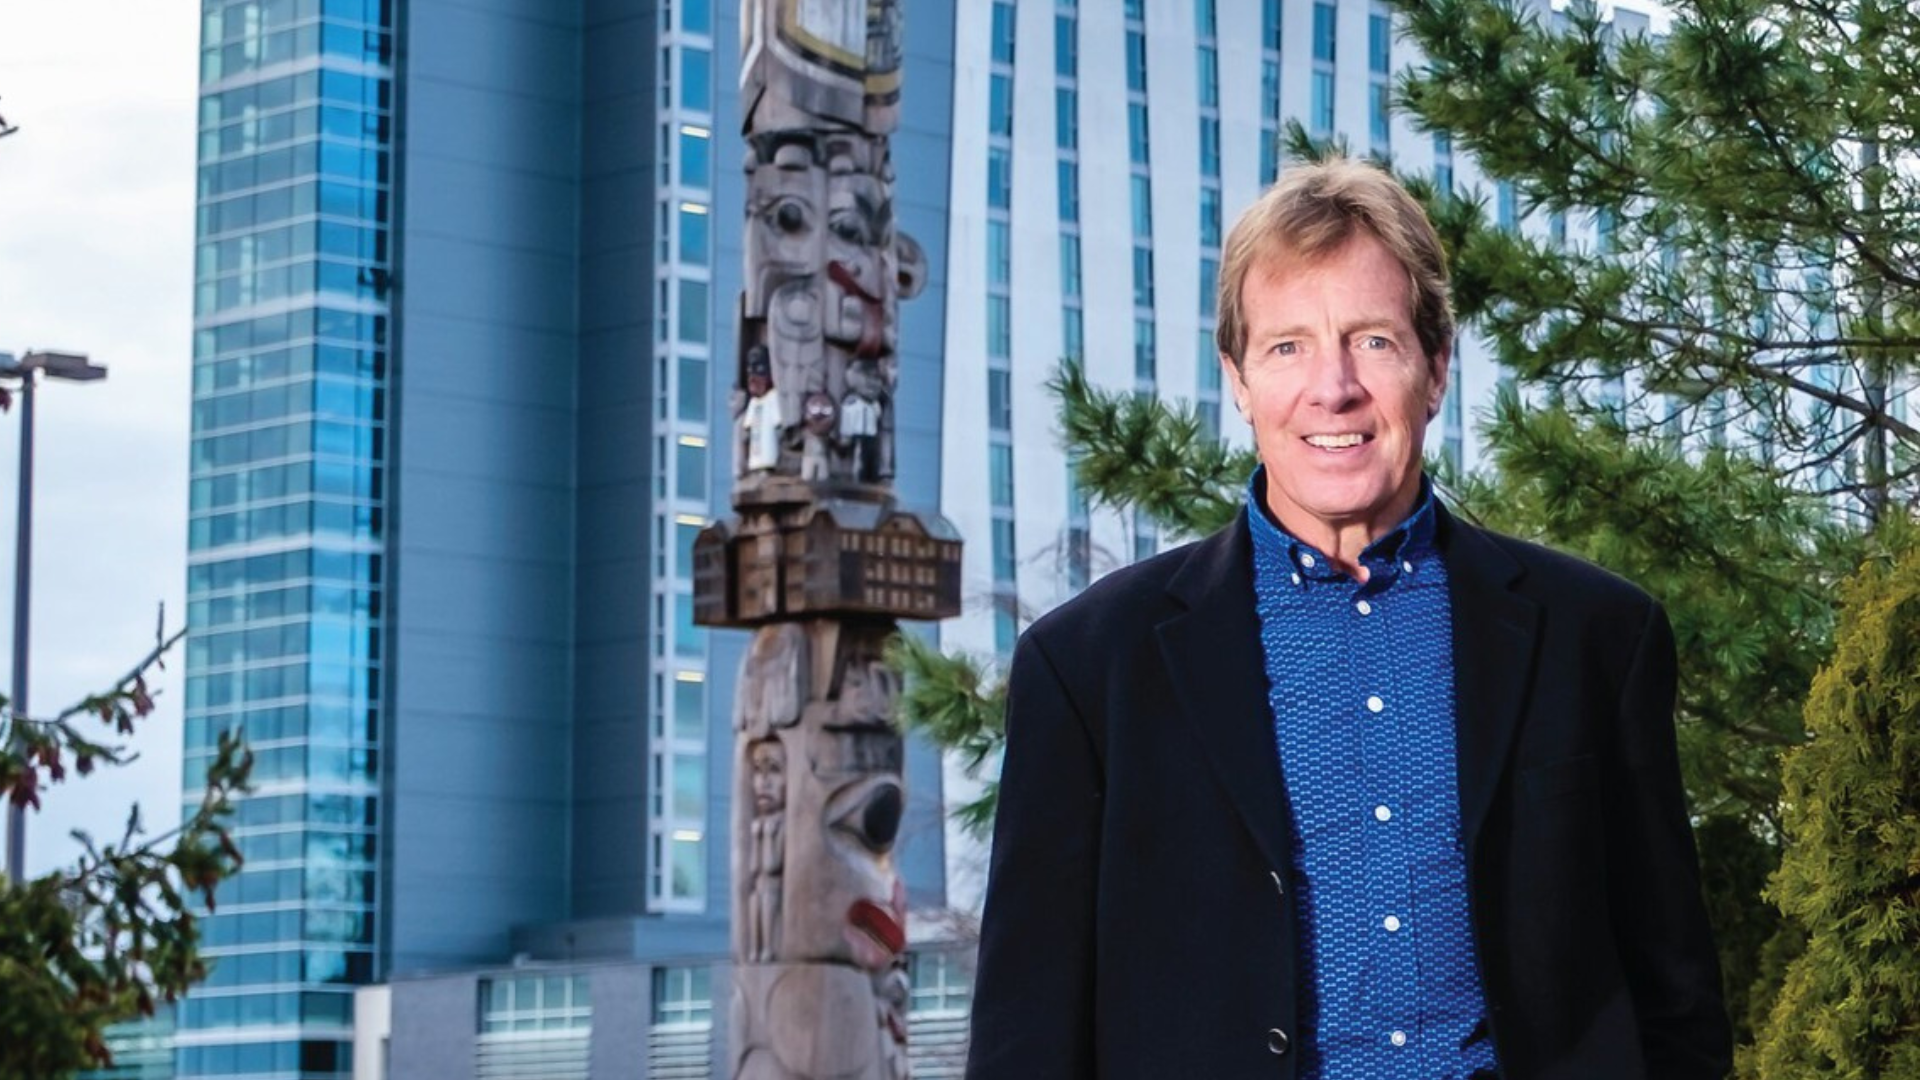 Reid Carter stands in front of building and totem pole.